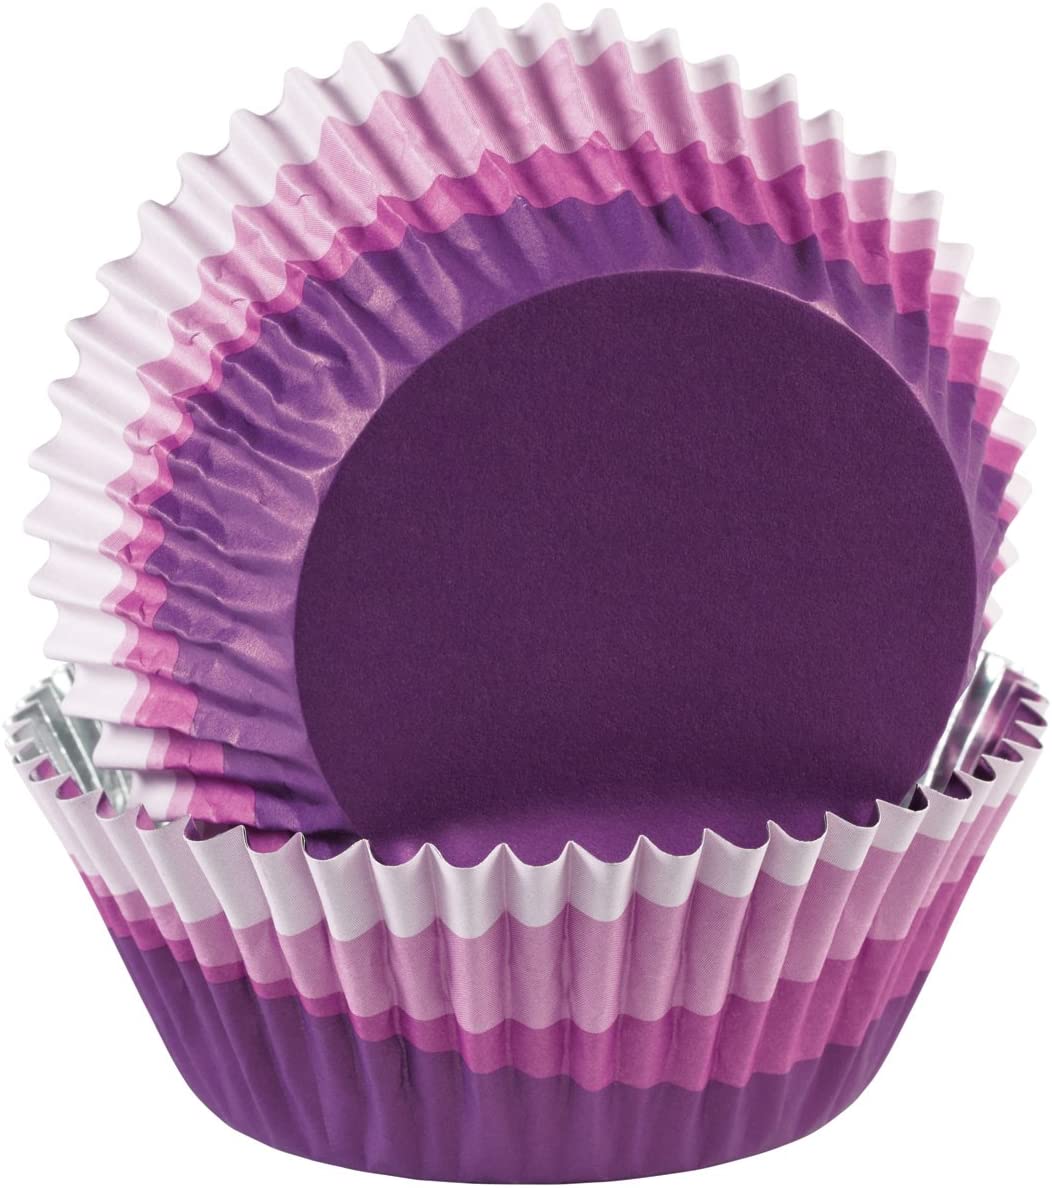 Wilton ColorCup Standard Baking Cups, Pack of 36, Purple Ombre